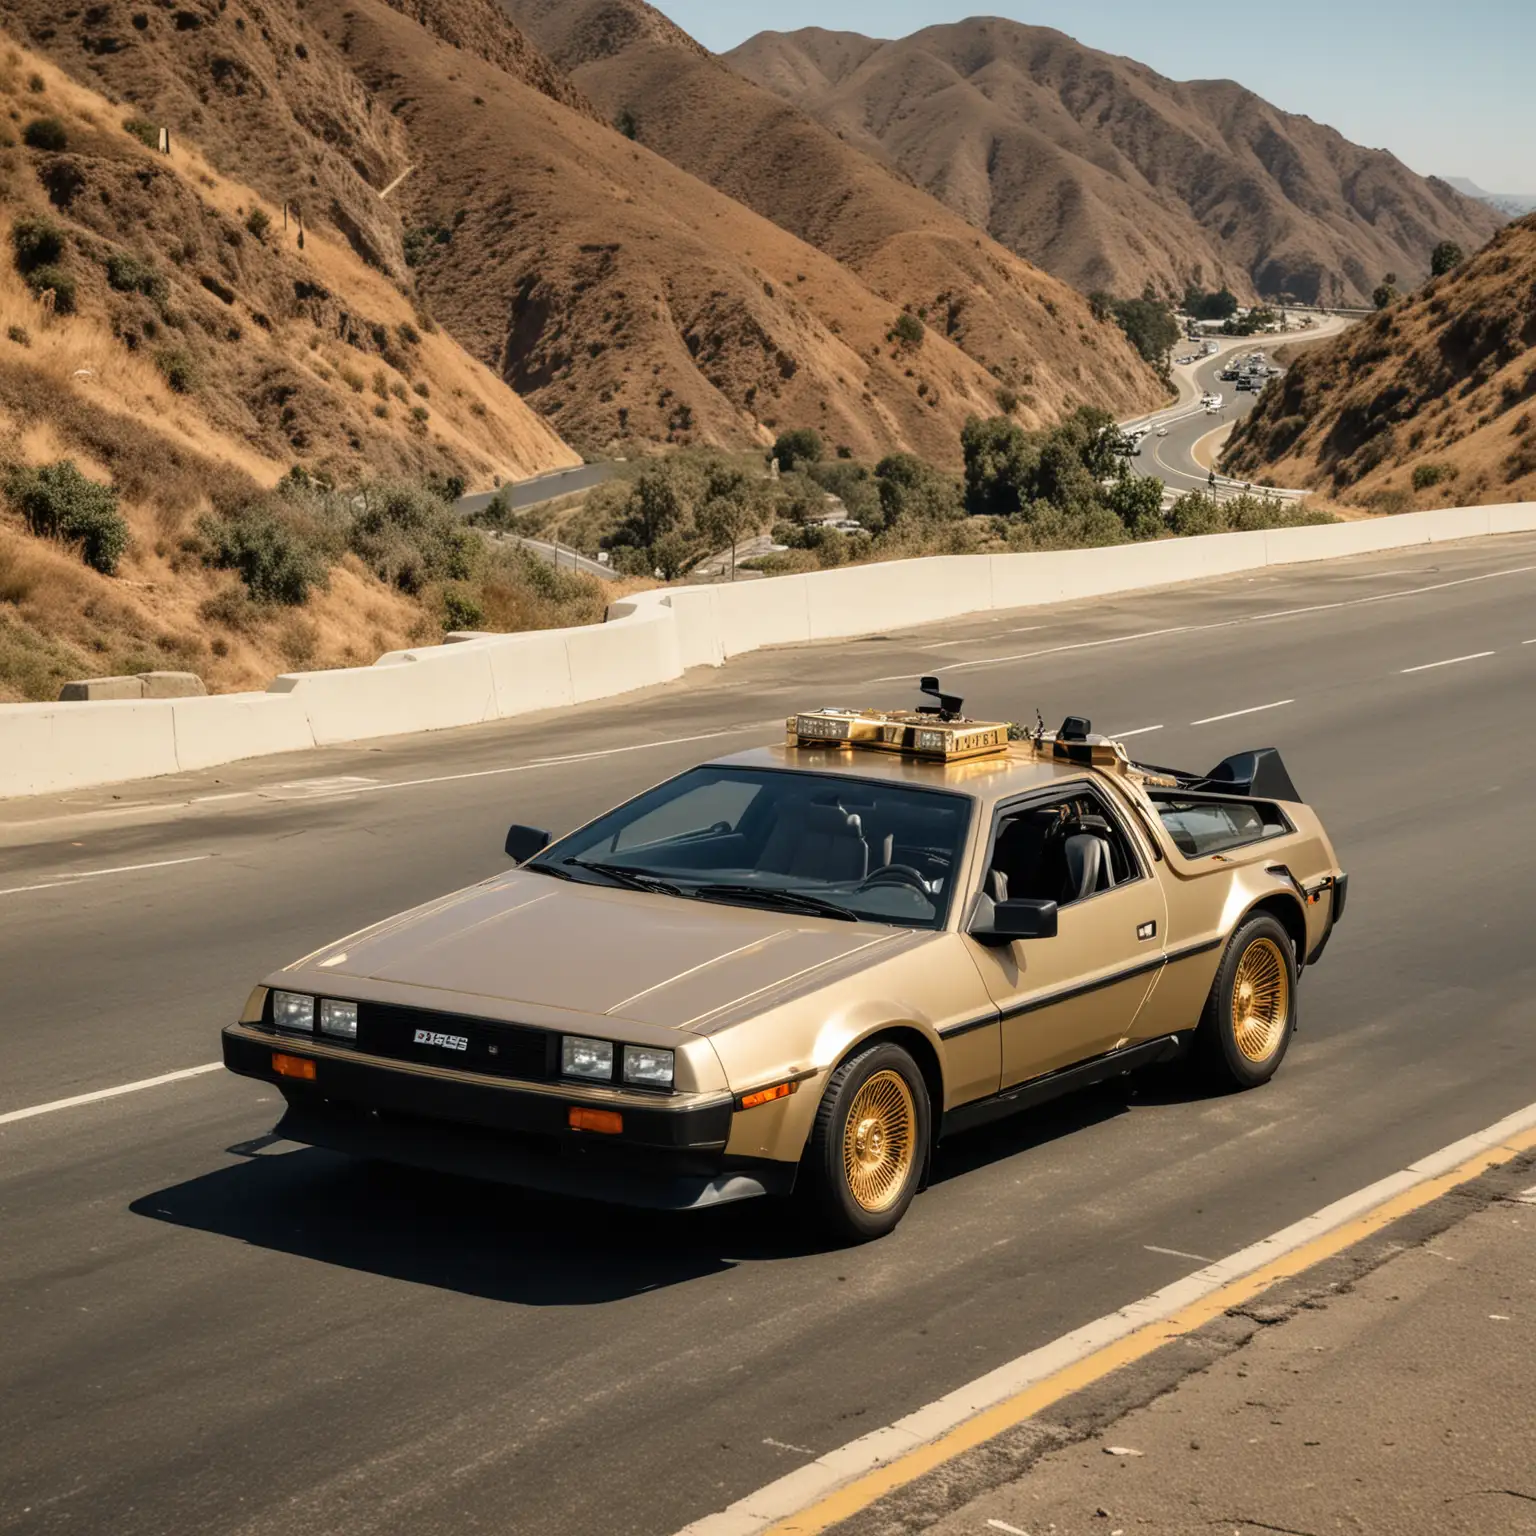 Vintage 1985 Delorean Driving on California Highway 1 with Gold Trues and Vogues Rims